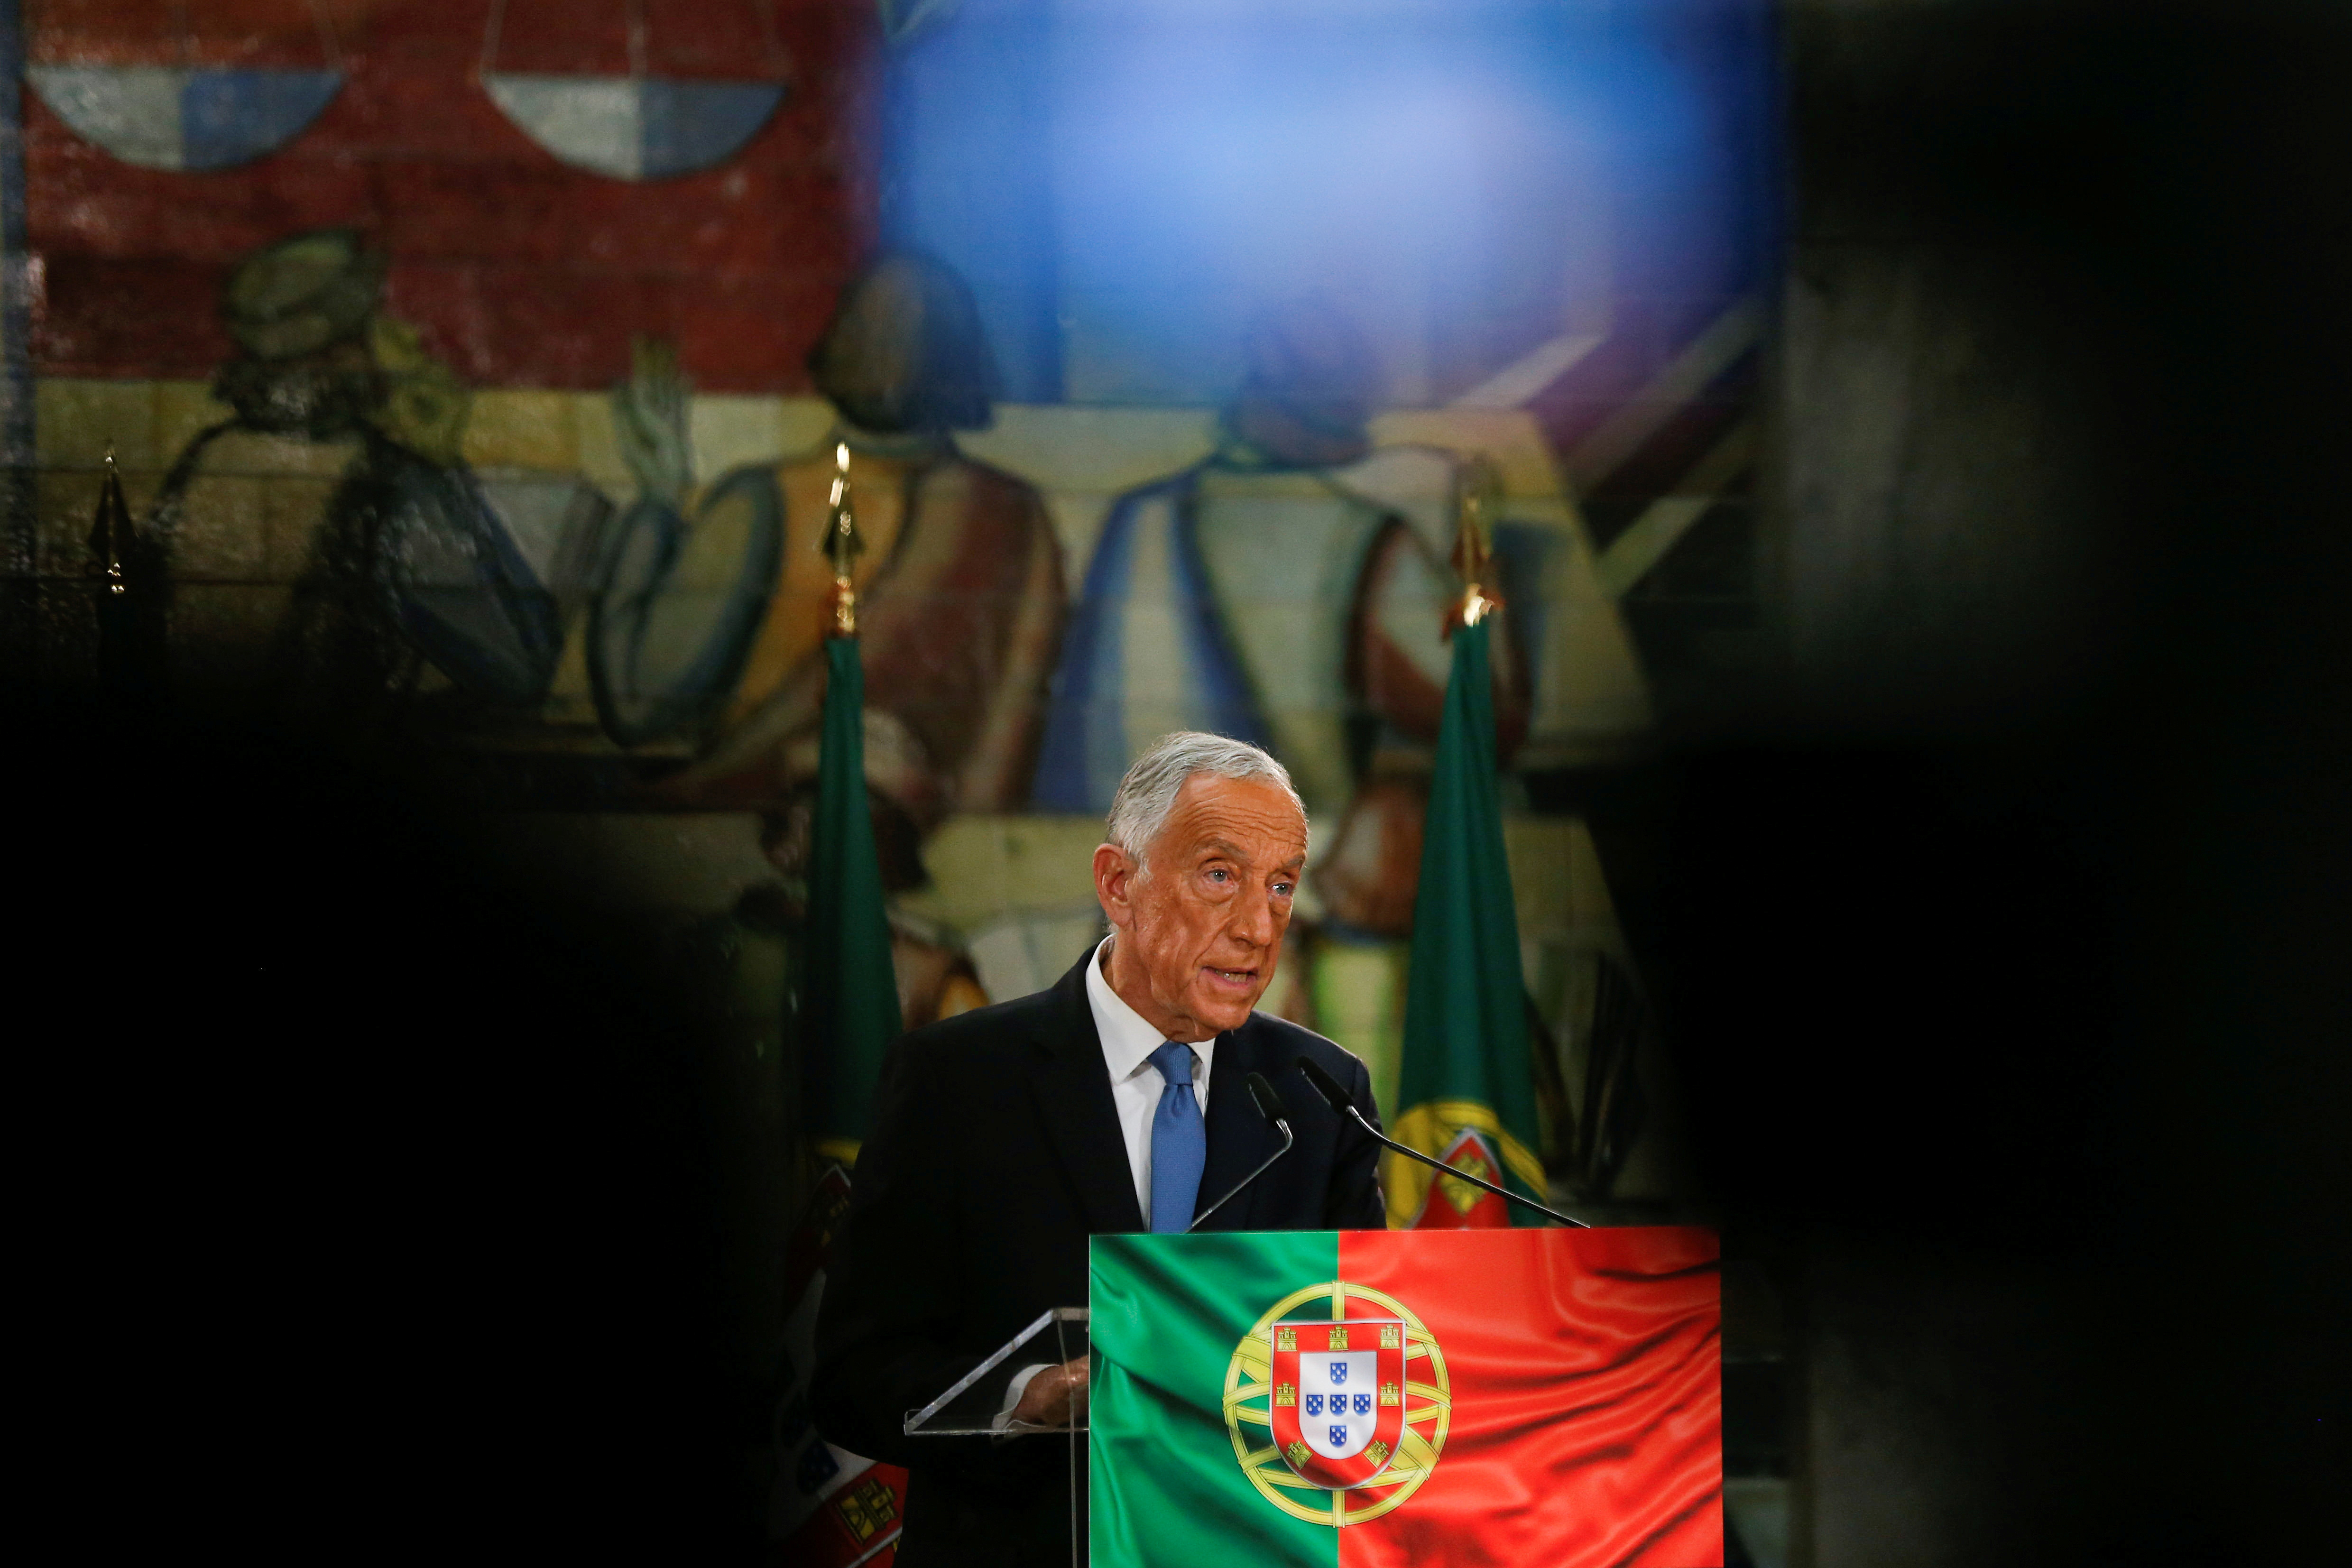 Re-elected Portugal's President Marcelo Rebelo de Sousa addresses journalists after the announcement of electoral results in Lisbon